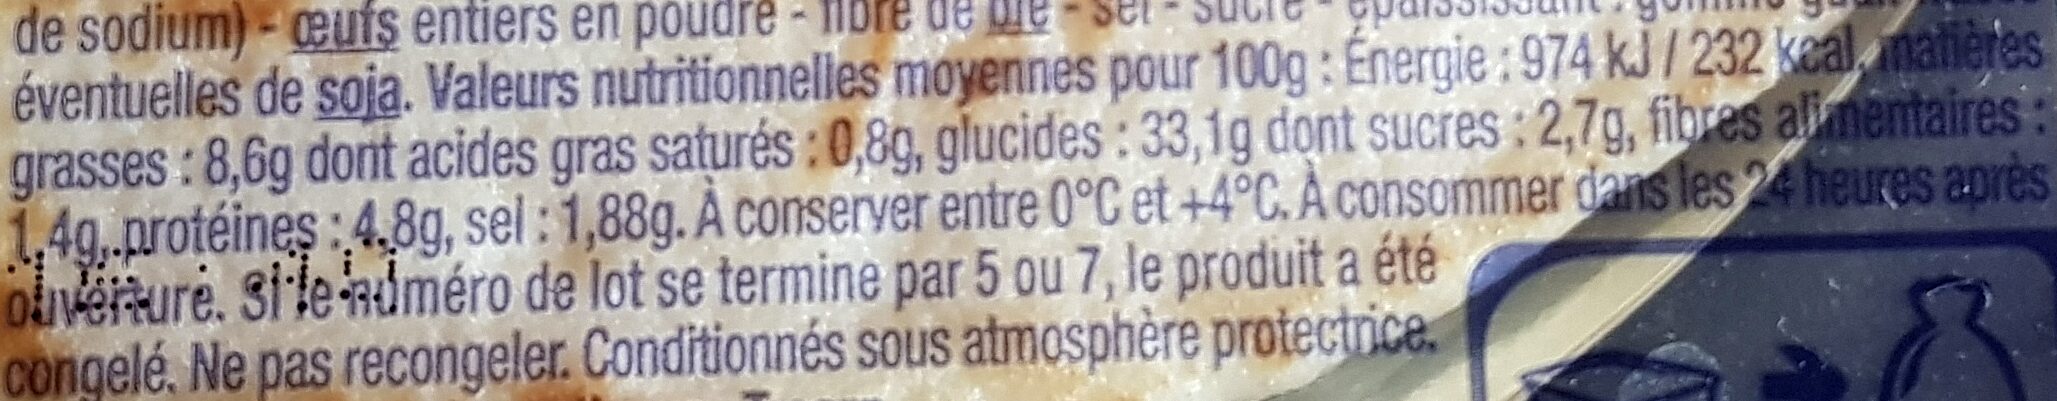 4 Blinis moelleux x 50g - Nutrition facts - fr